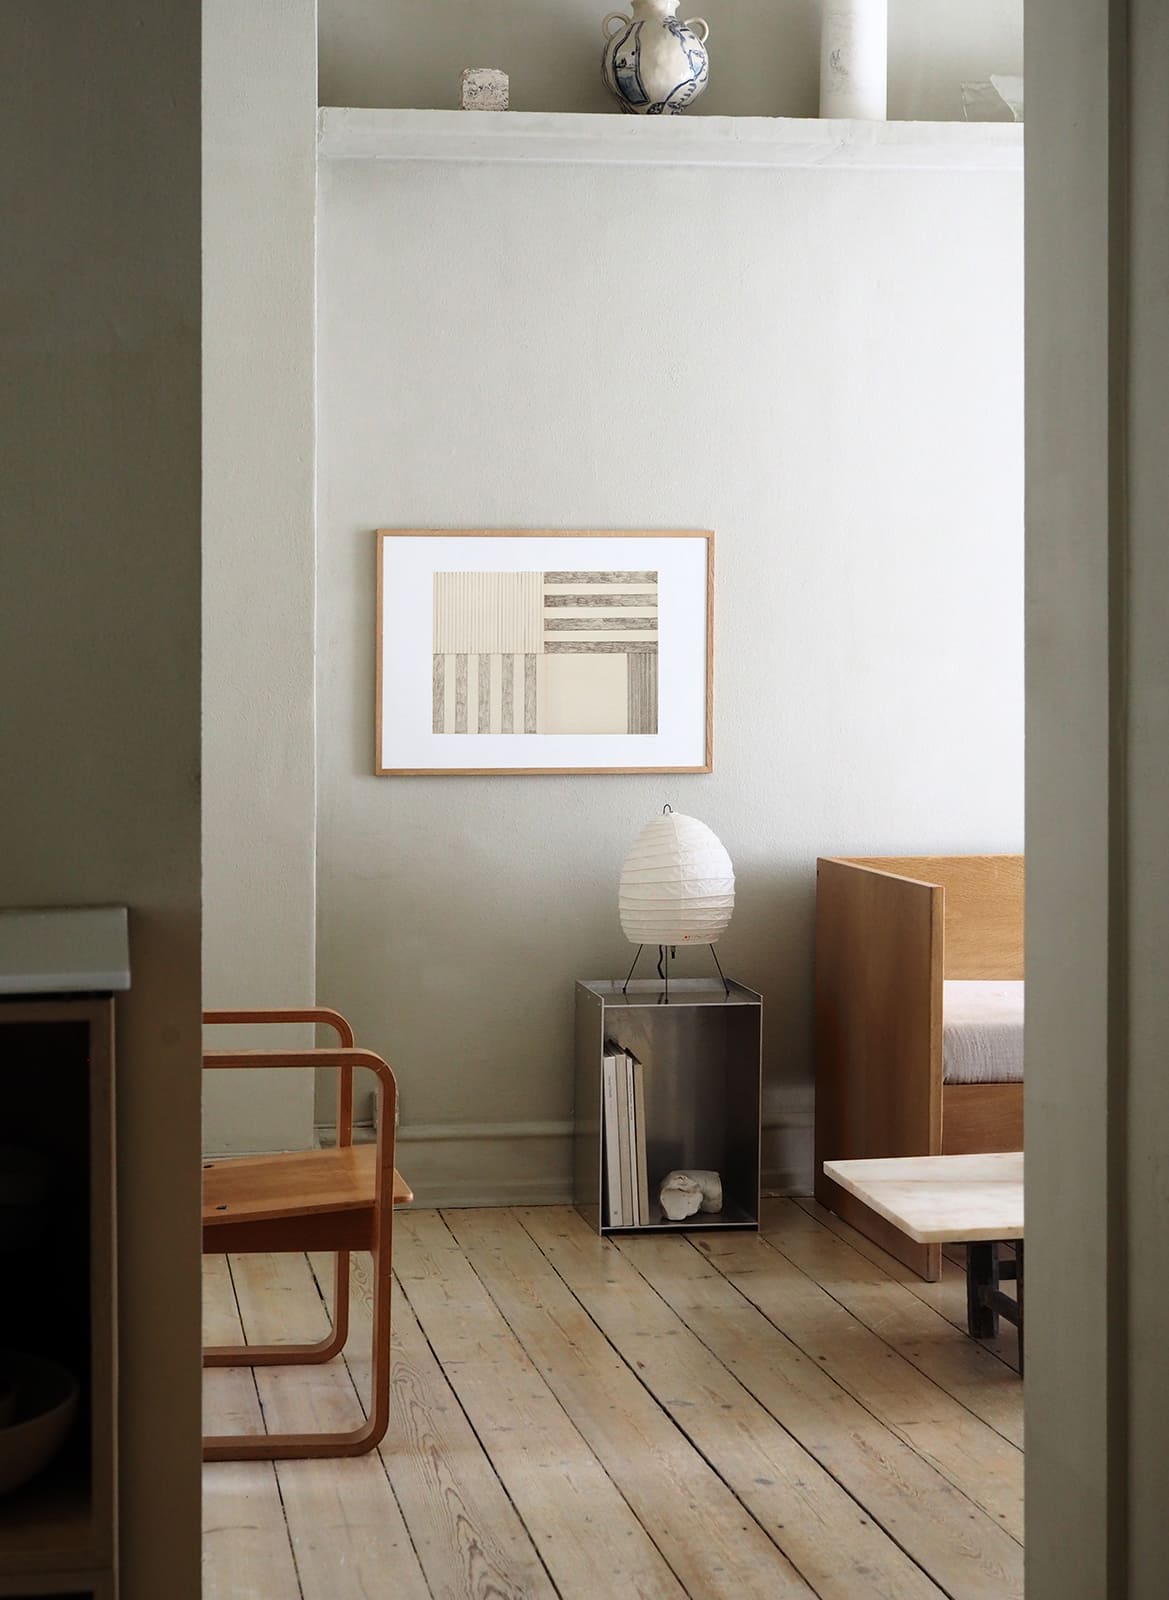  Framed minimalistic poster hanging in a living room by Atelier Cph